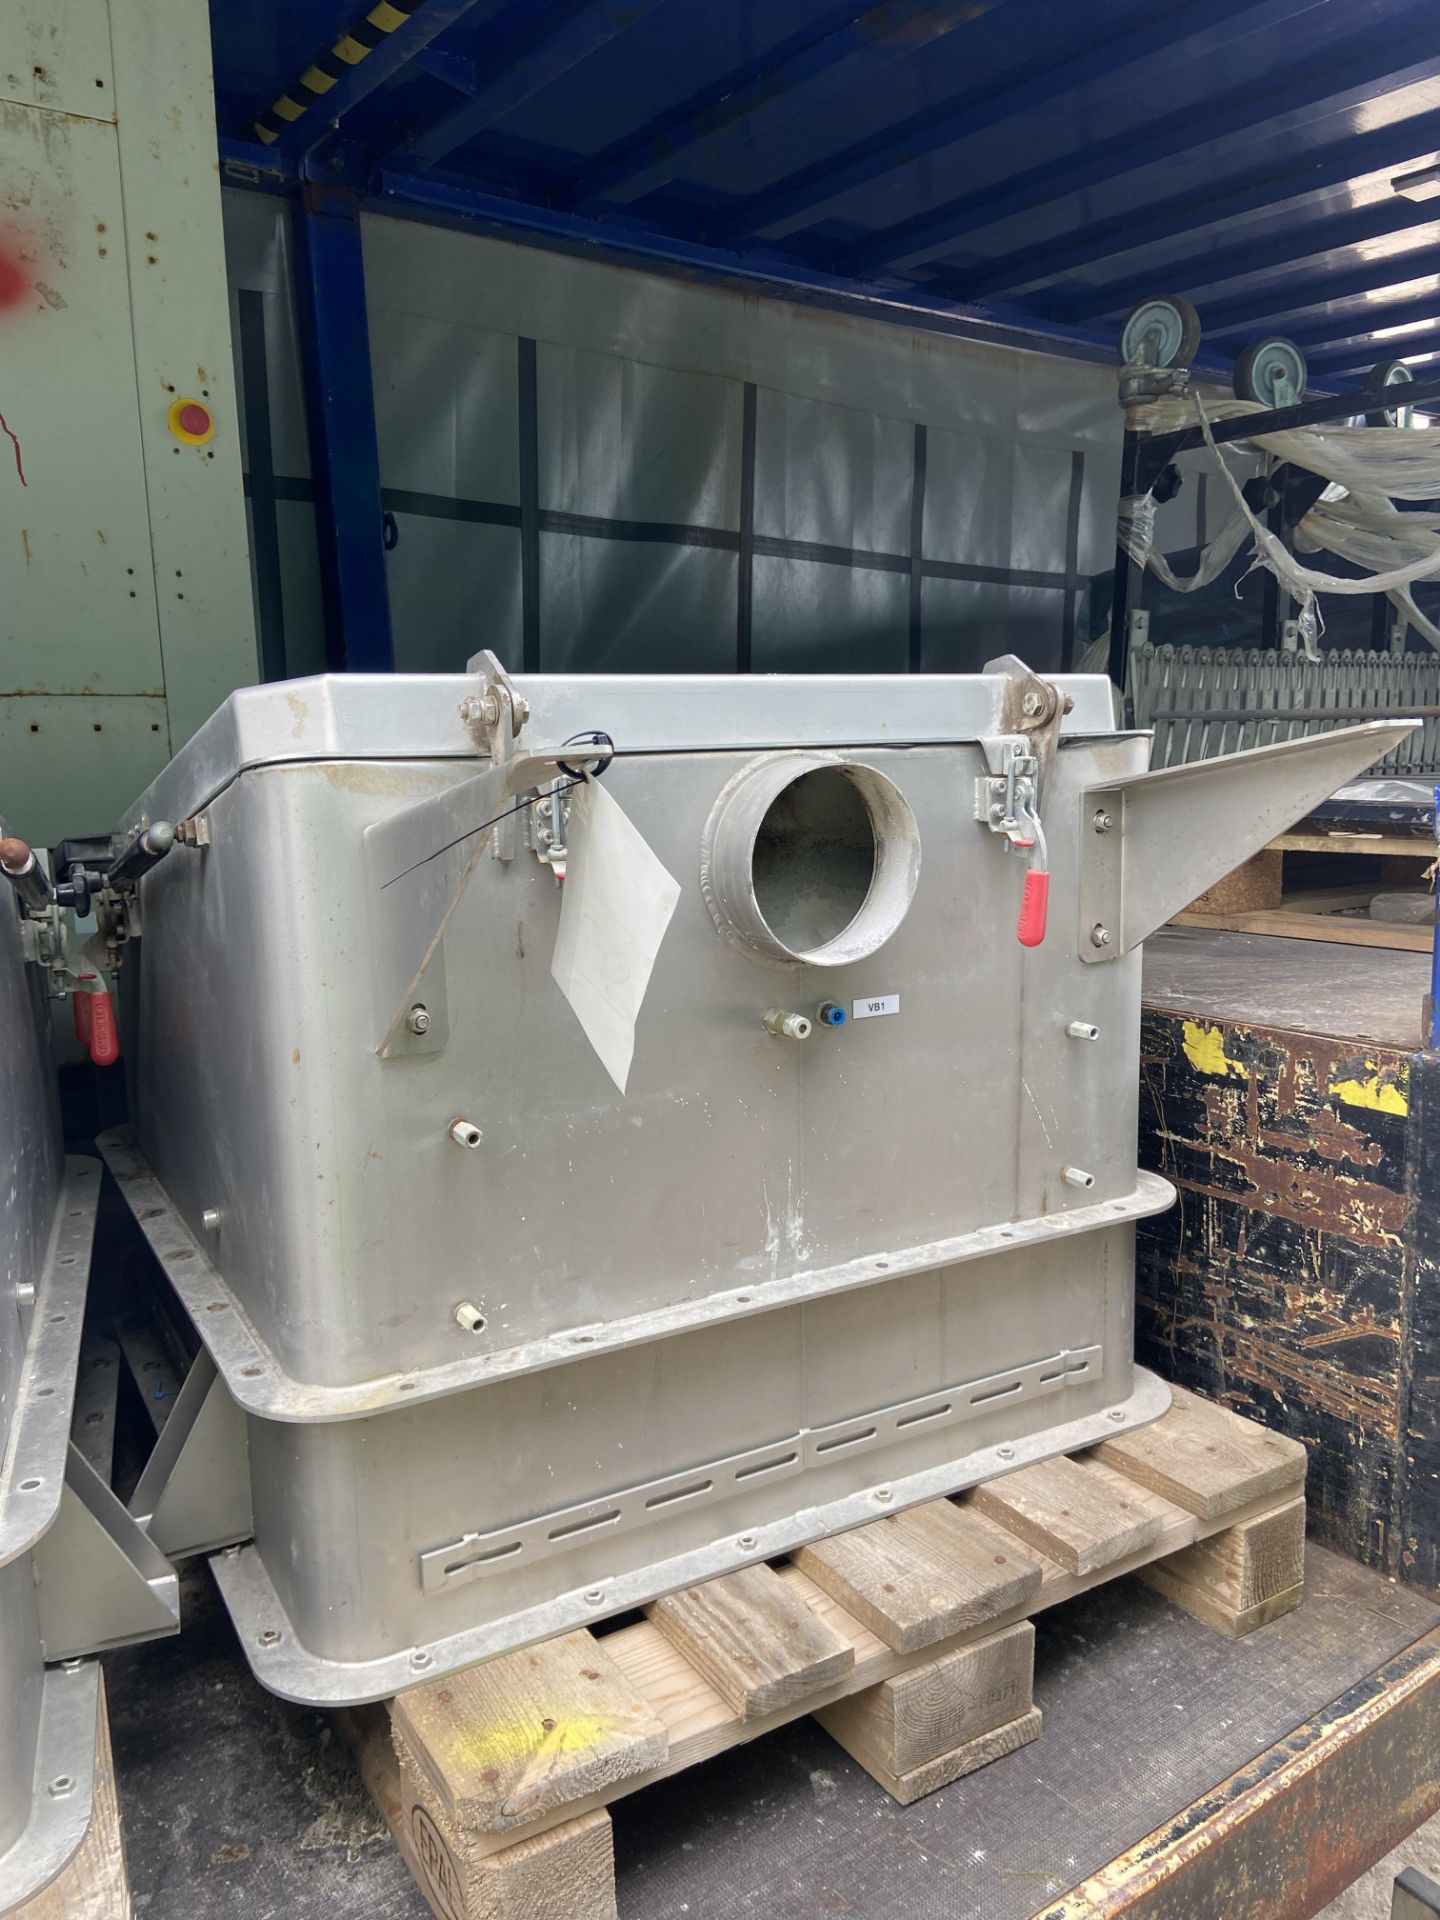 Stainless Steel Manual Mixing Hopper, approx. 1.3m x 800mm, lot located in Bretherton, Lancashire,